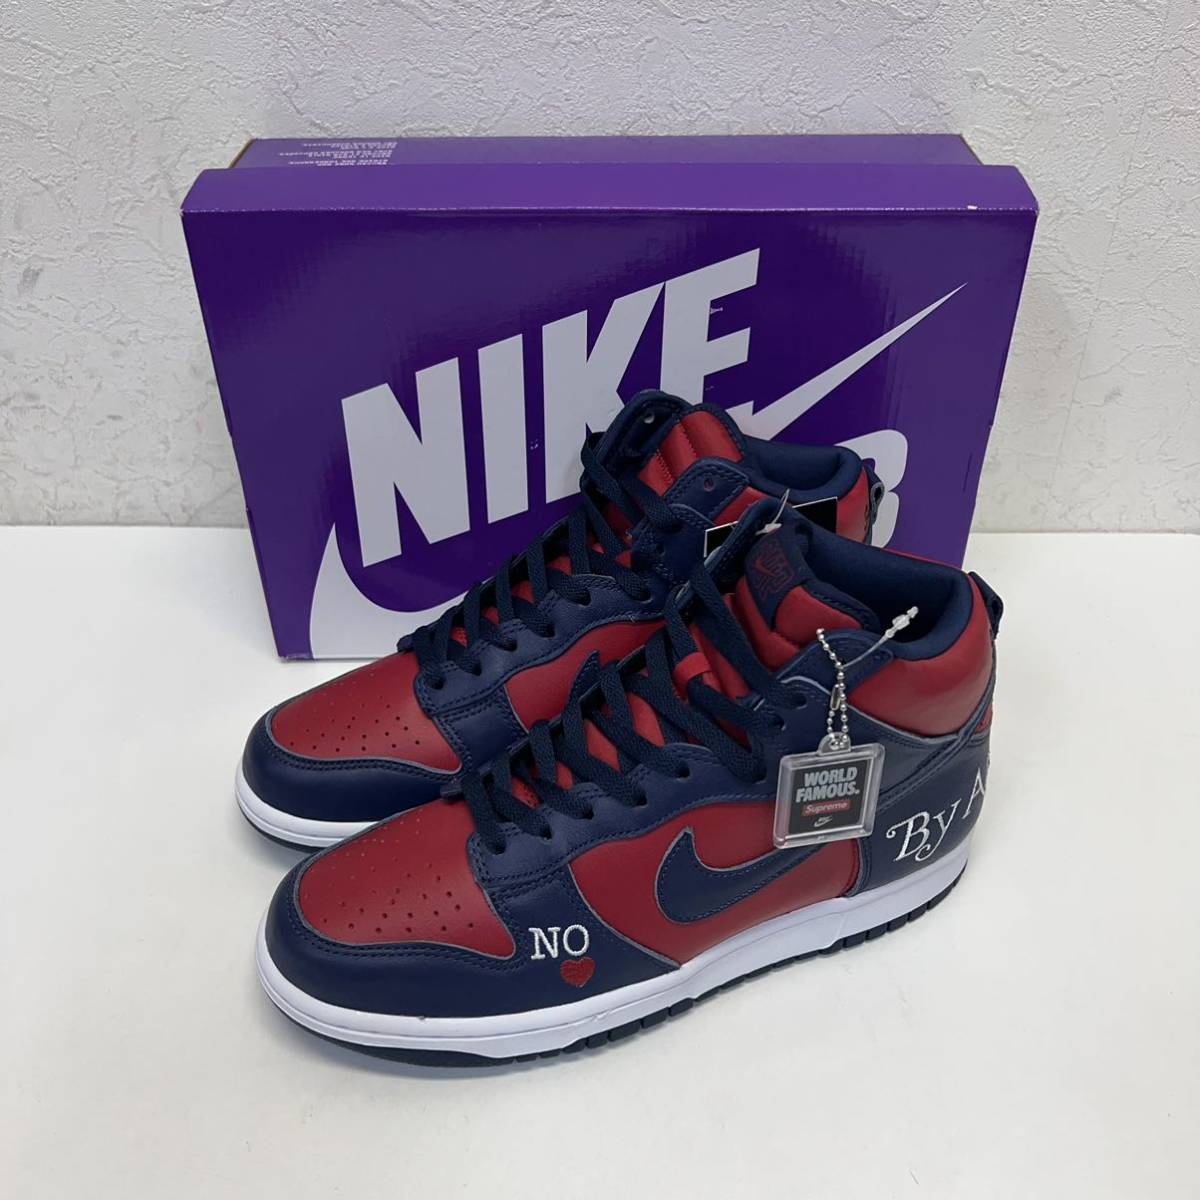 Supreme × NIKE SB Dunk High By Any Means Red/Navy-White DN3741-600 シュプリーム ナイキ SB ダンクハイ size US 9.5 新品未使用品_画像2